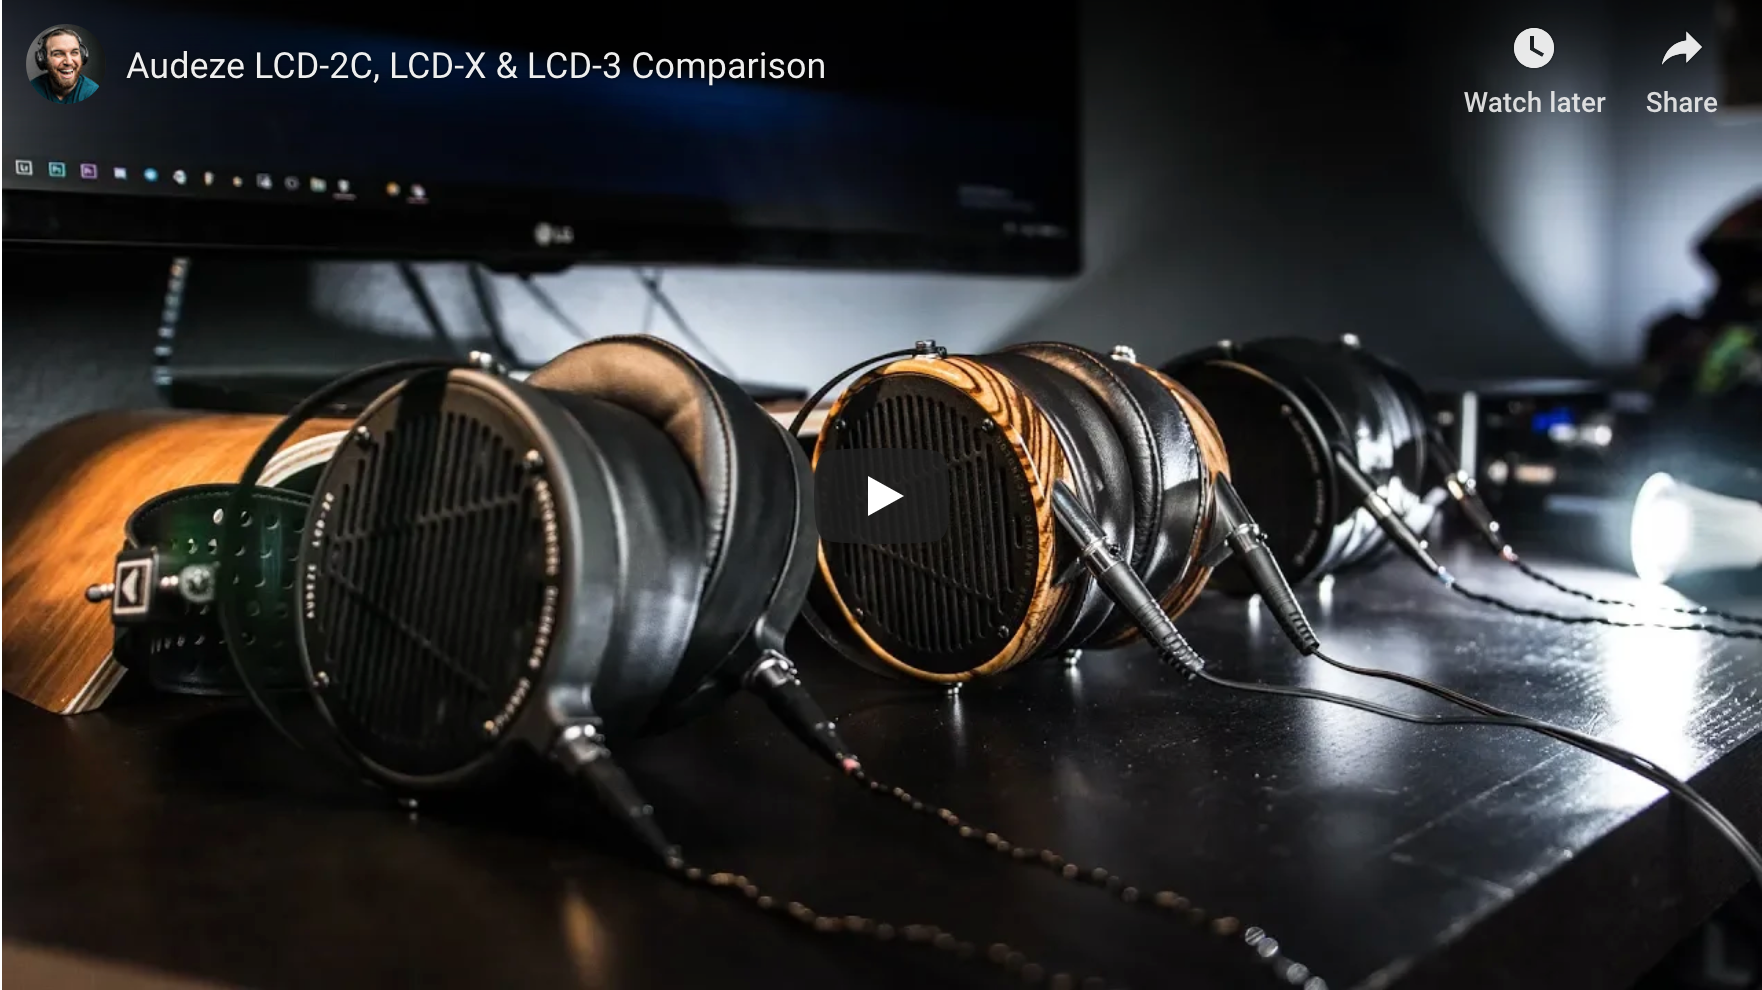 Comparative Analysis of the Audeze LCD-2C, LCD-X, and LCD-3